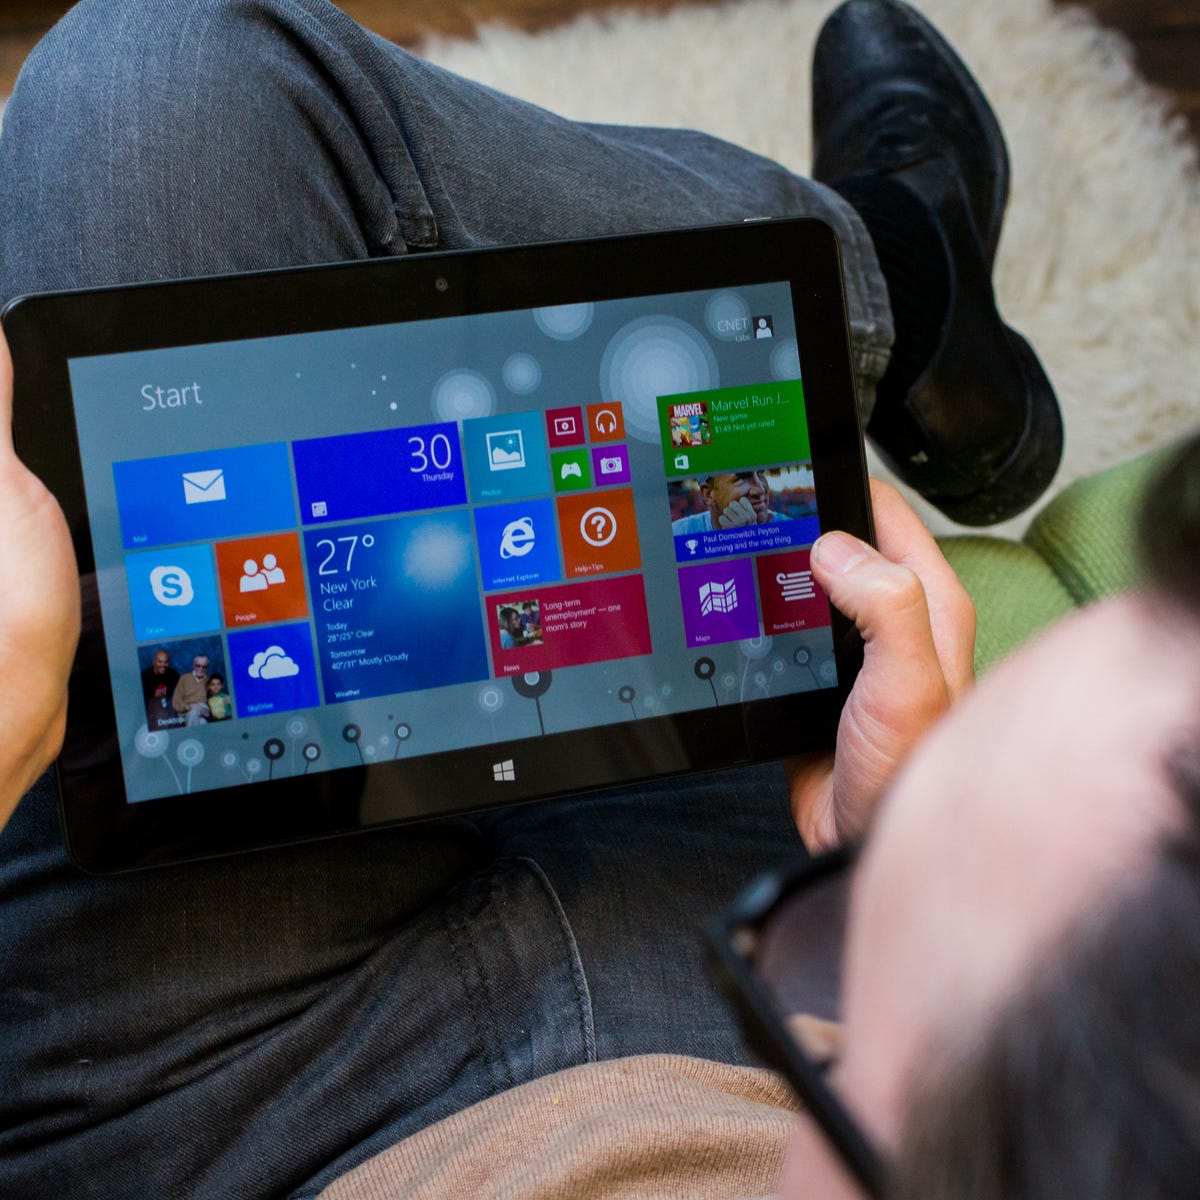 Dell Venue 11 Pro review: This Atom-powered tablet goes full-HD - CNET